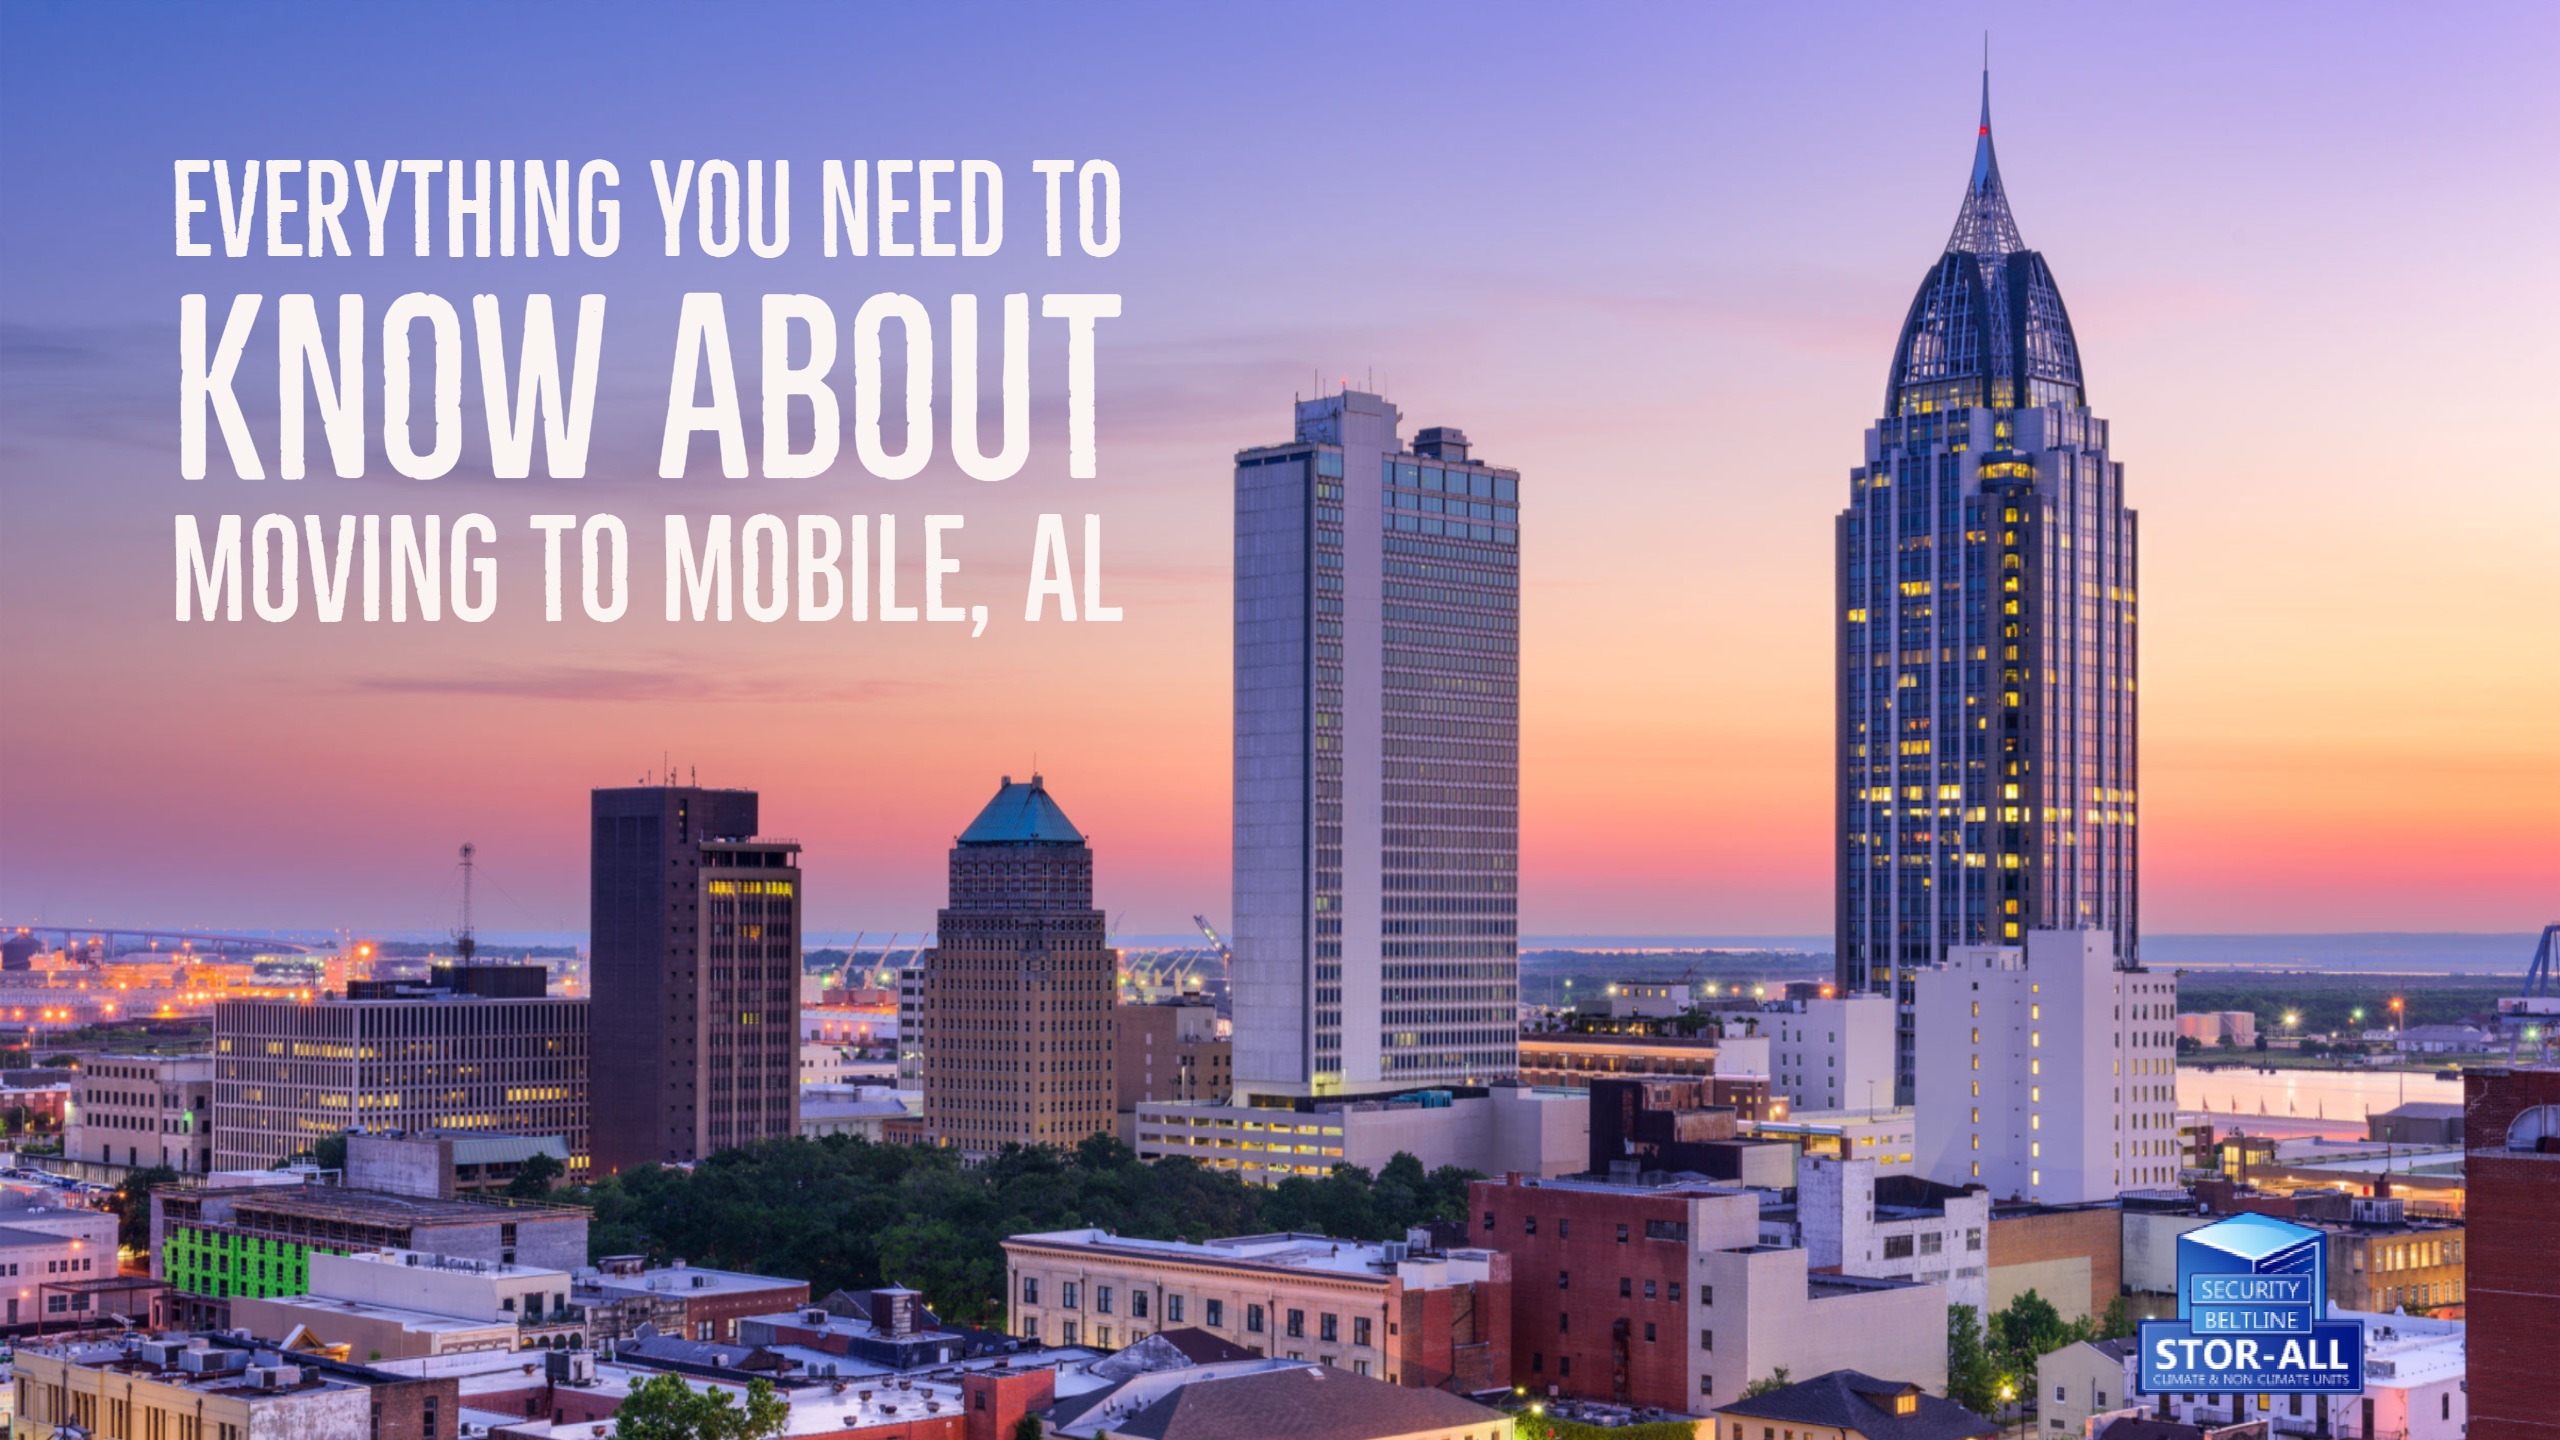 Everything You Need to Know About Moving to Mobile, AL